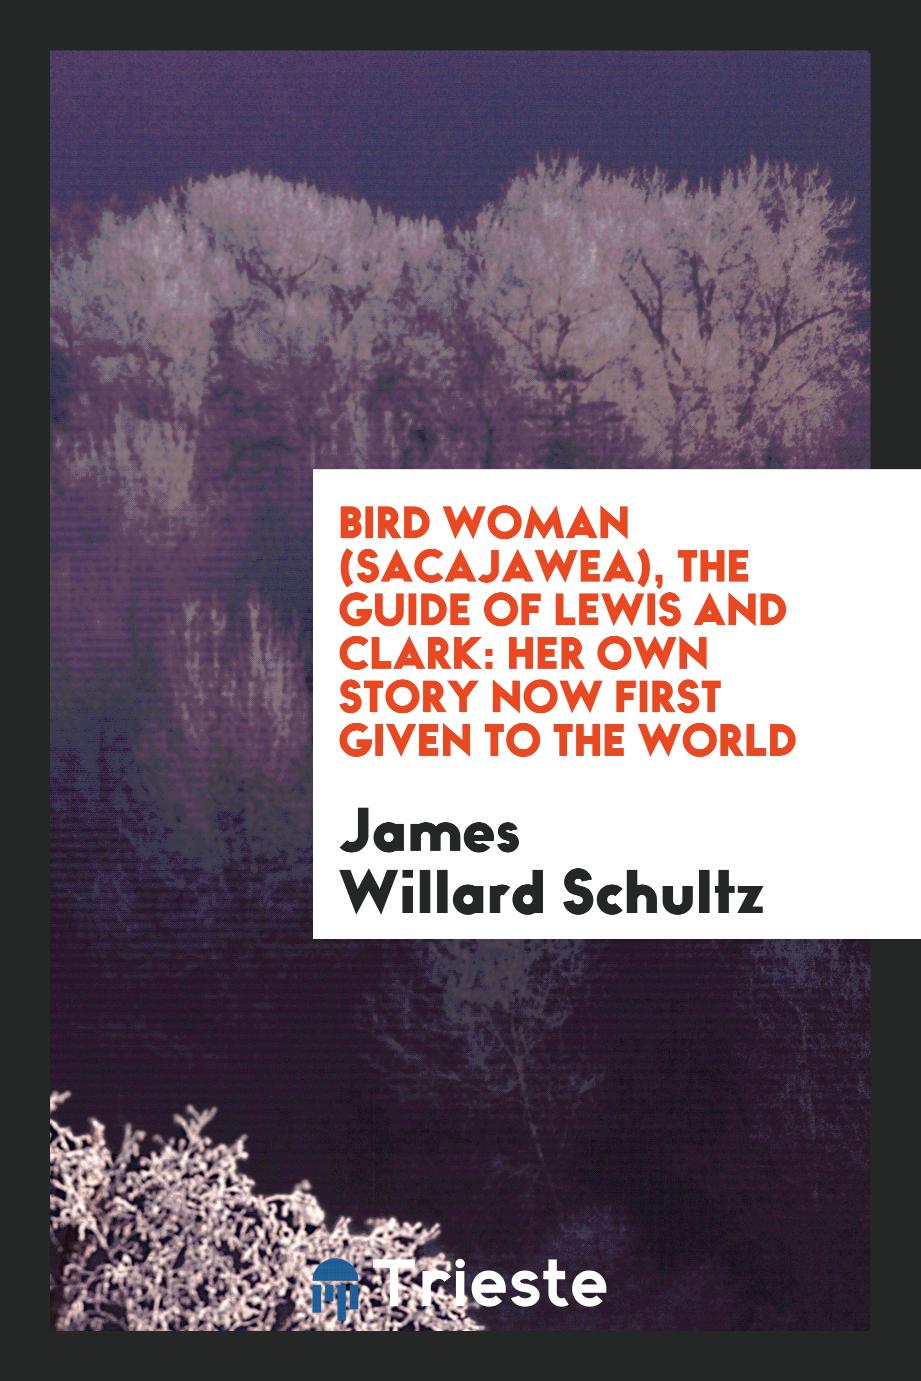 Bird Woman (Sacajawea), the Guide of Lewis and Clark: Her Own Story Now First given to the World